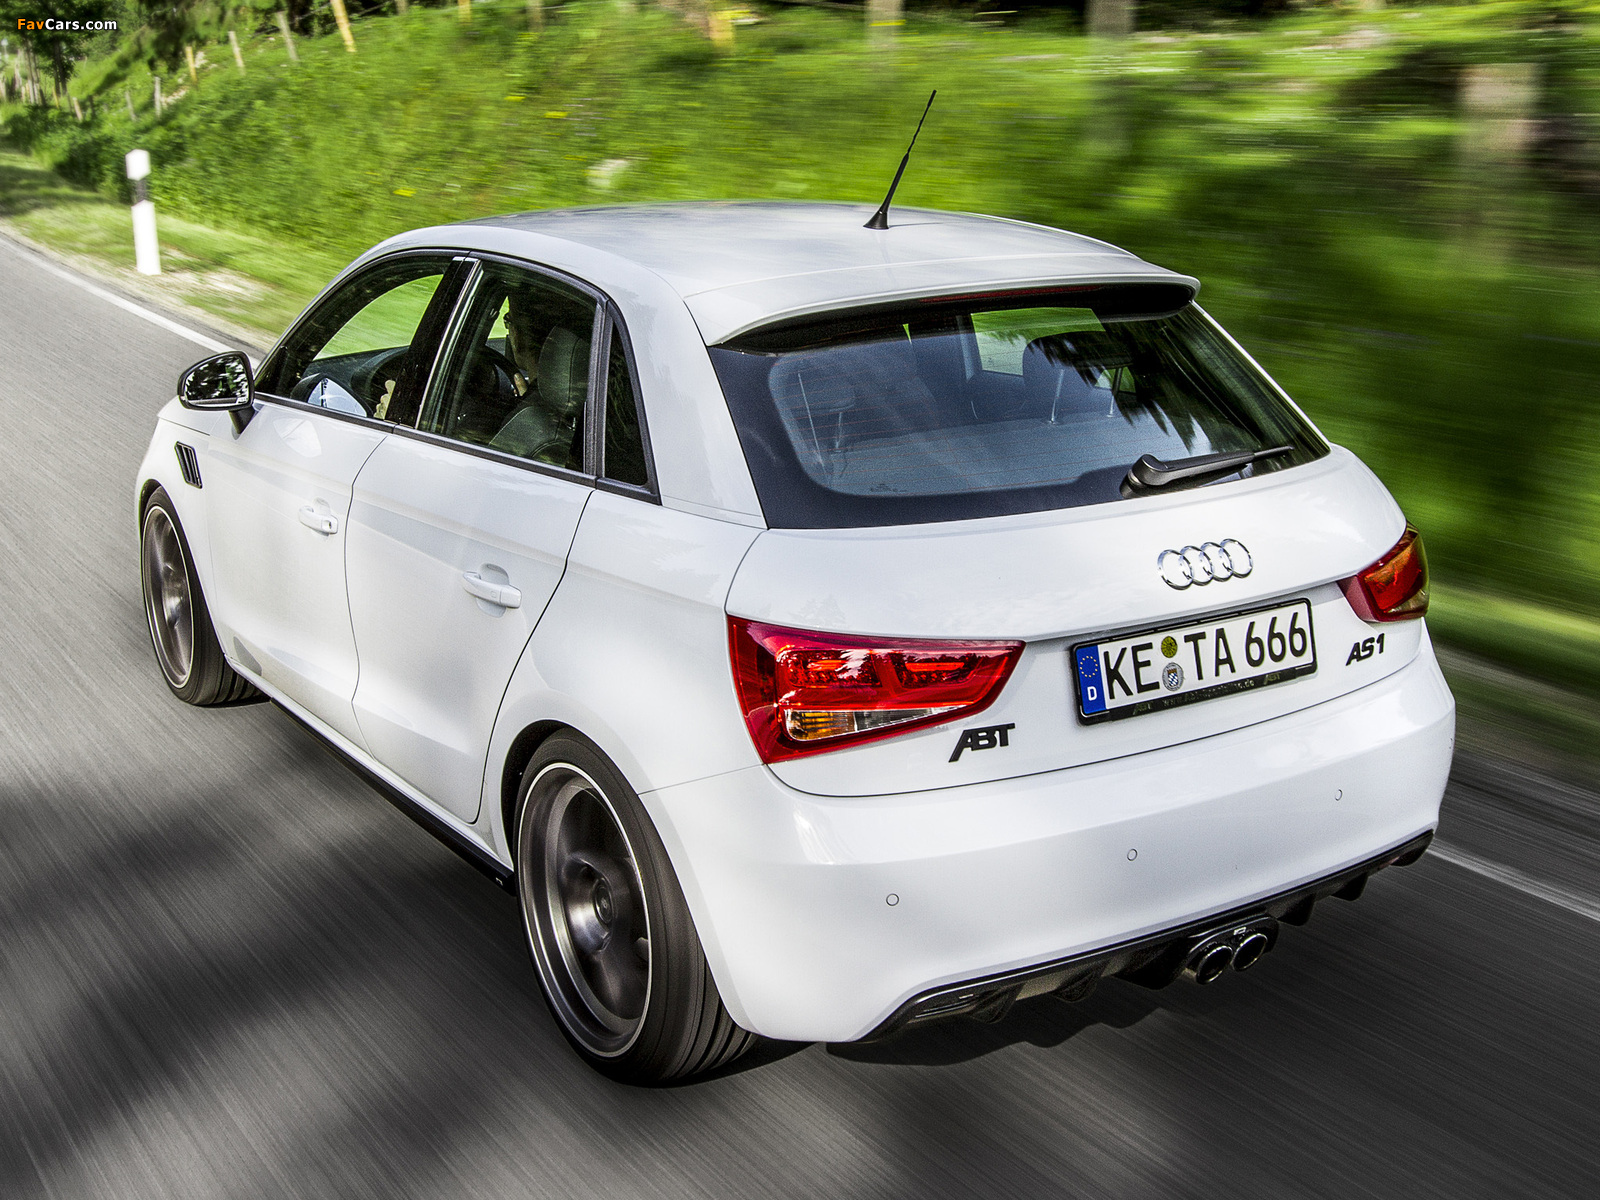 ABT AS1 Sportback 8X (2012) pictures (1600 x 1200)